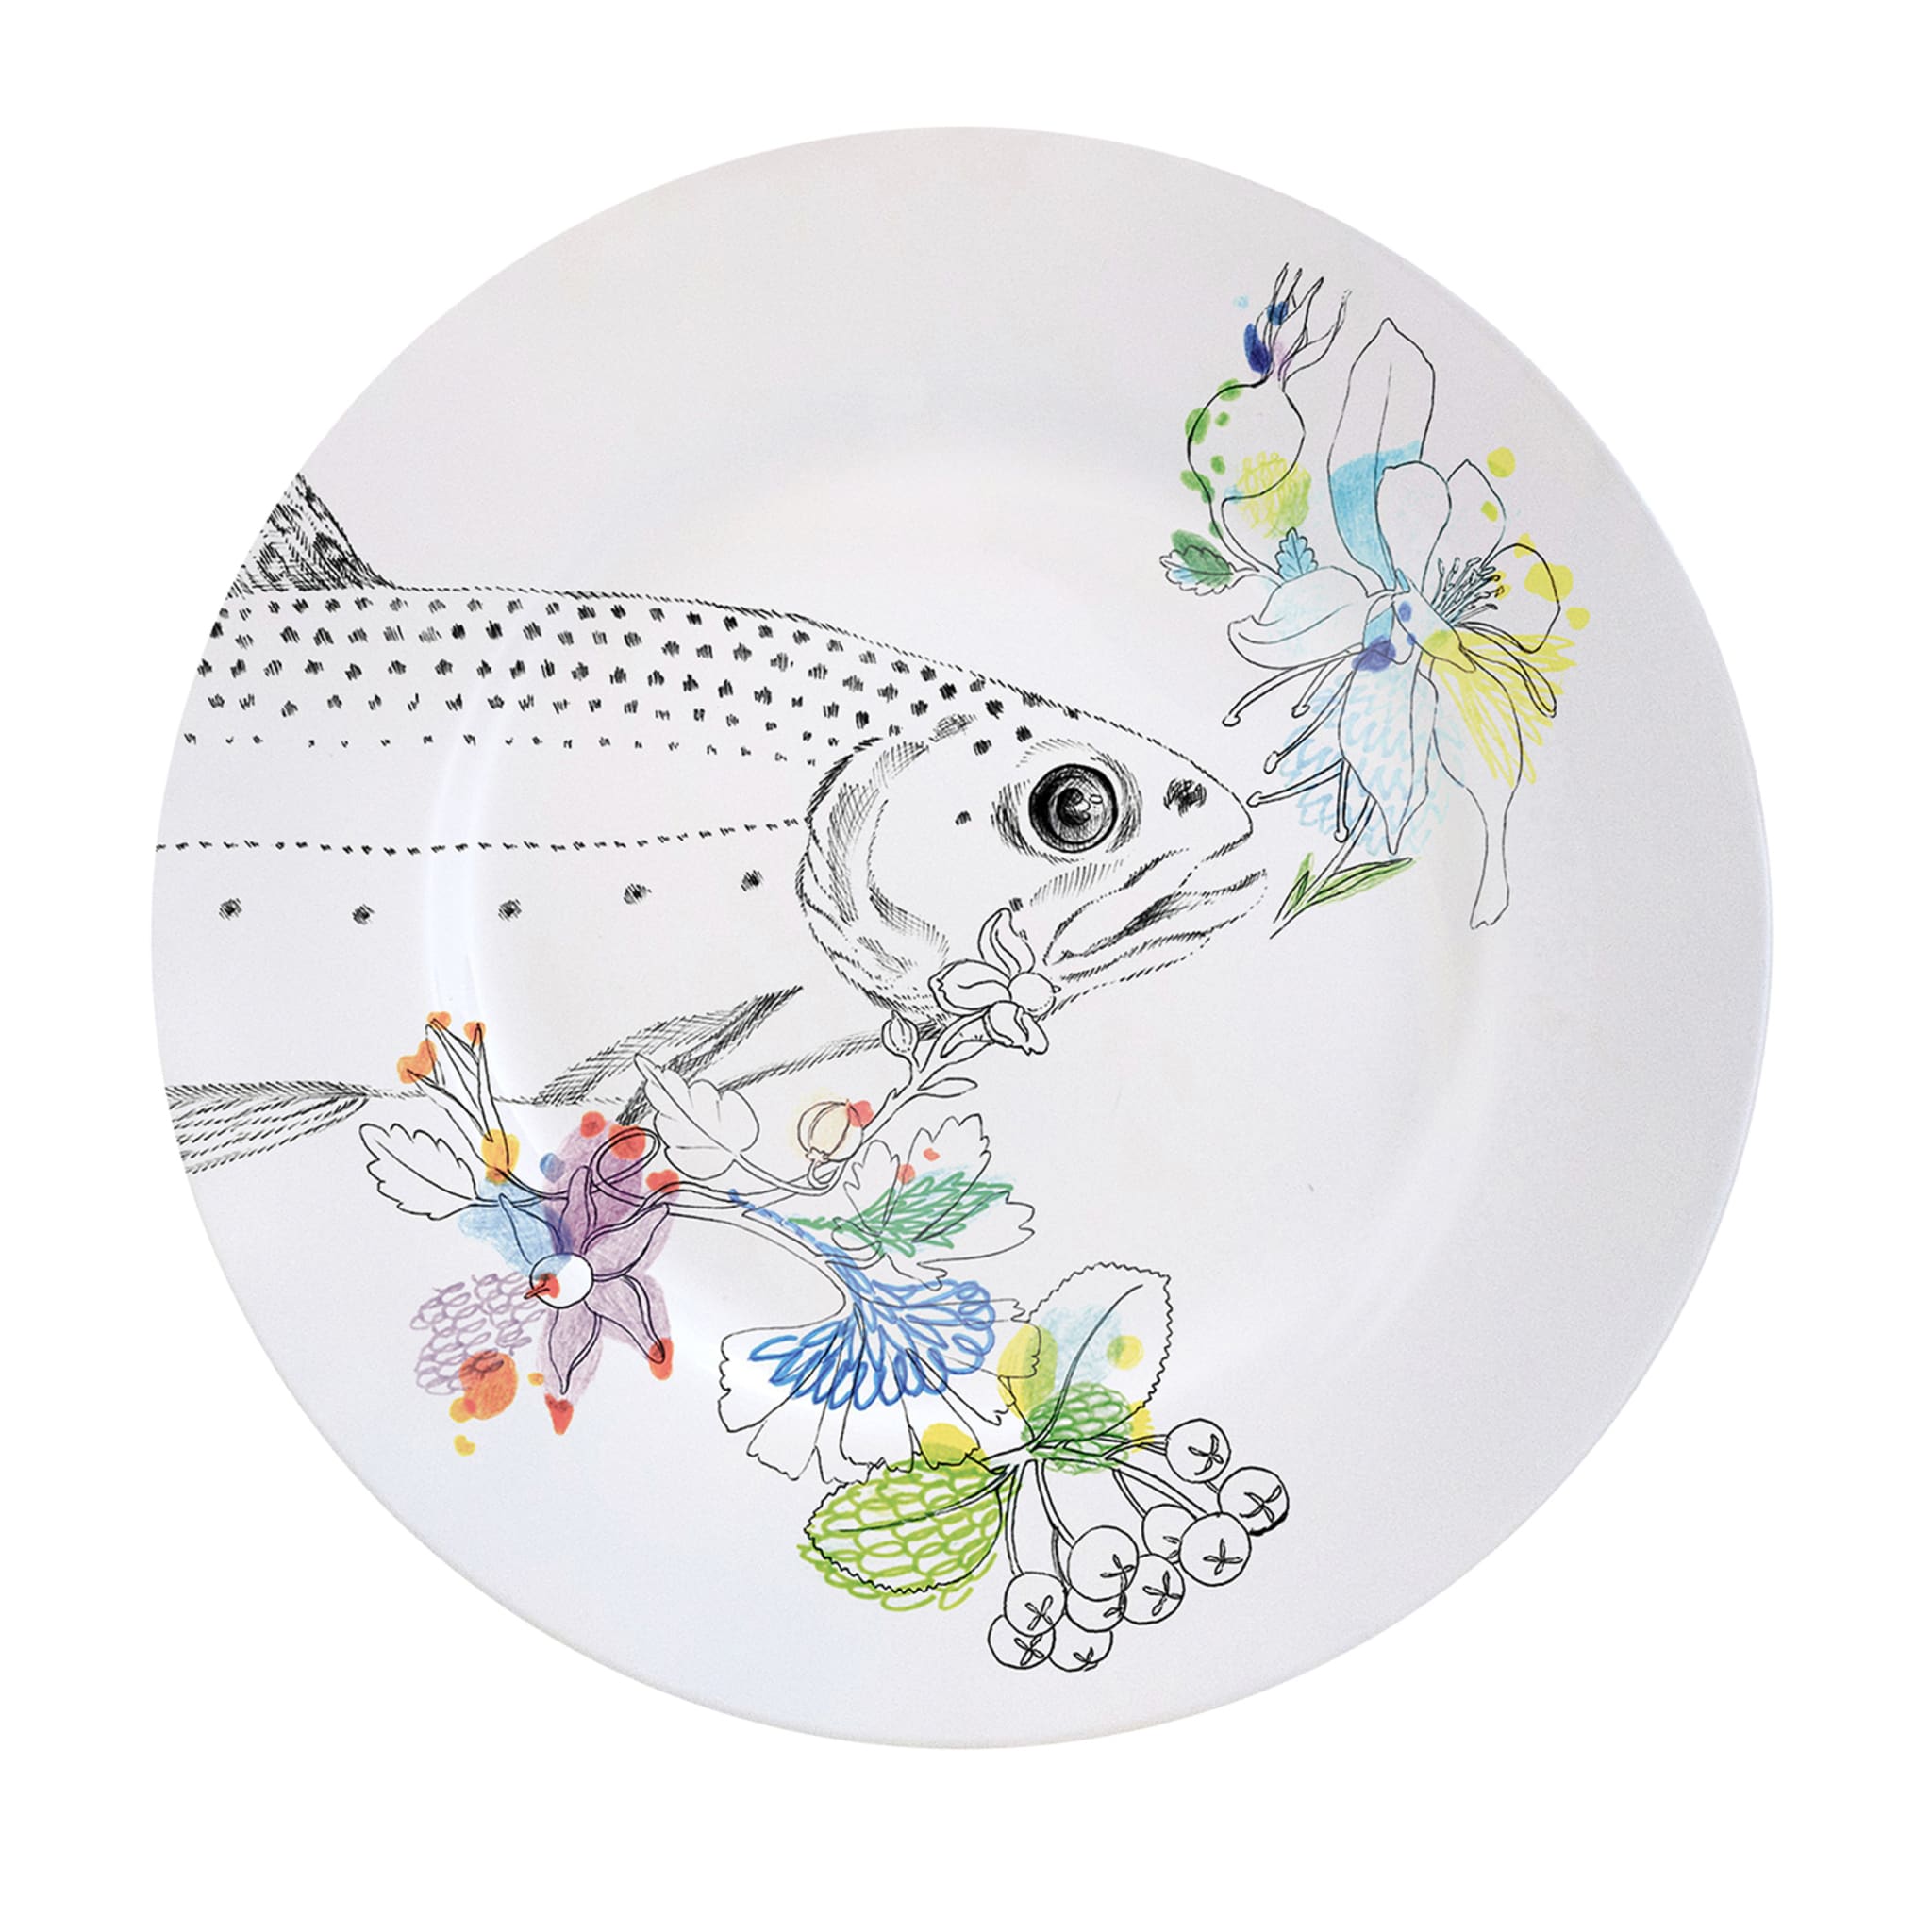 Assiette plate "Truite des bois" (An Ode To The Woods) - Vue principale